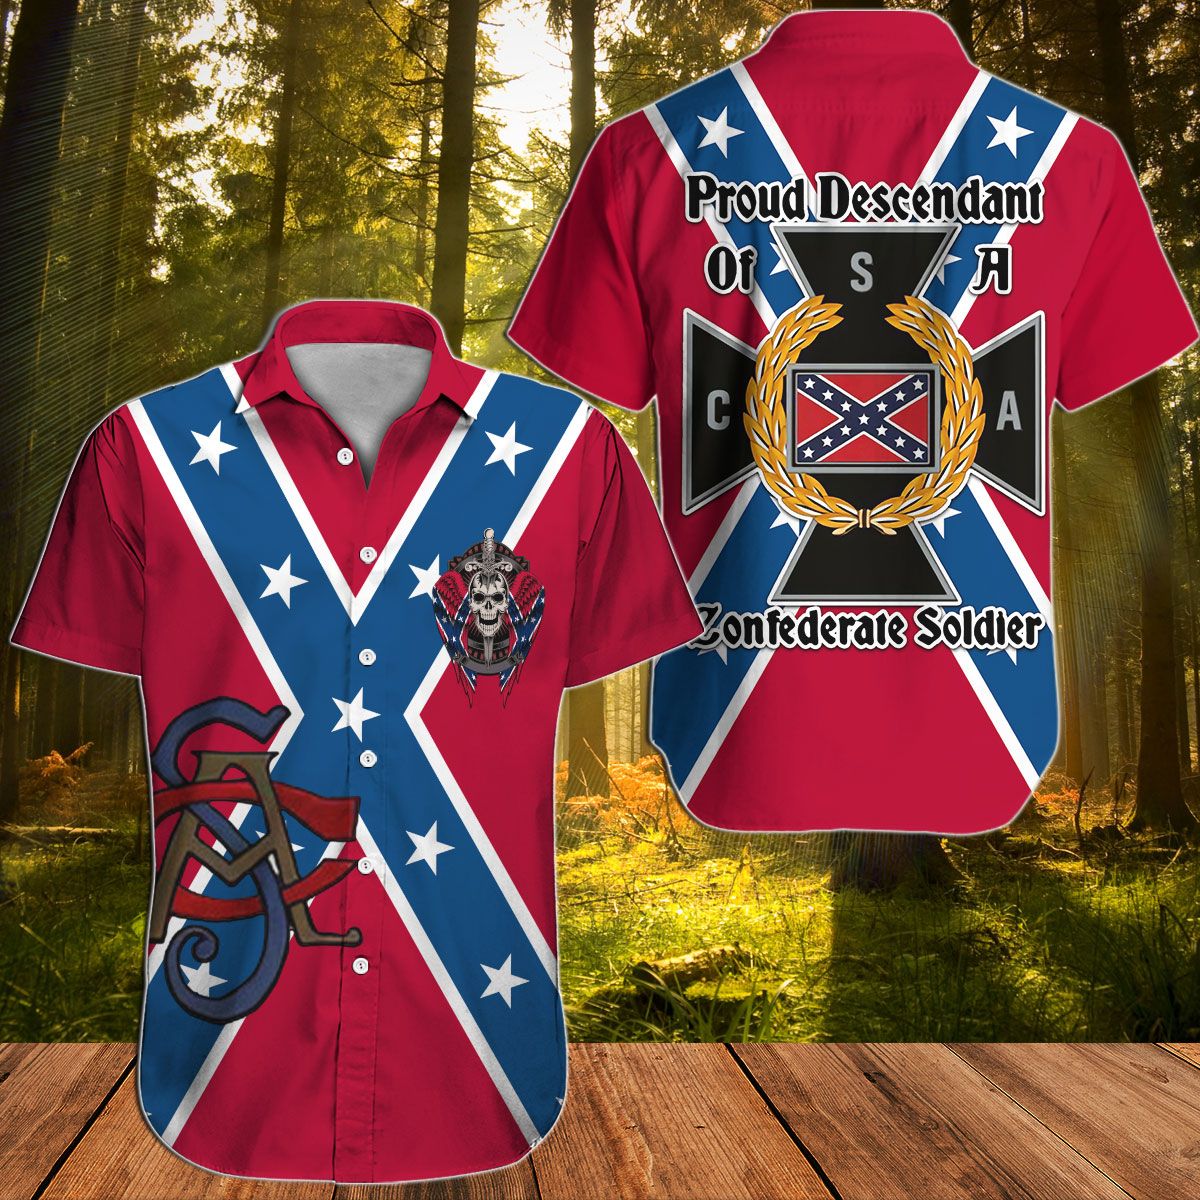 Southern Proud descendant of a confederate solider hawaiian shirt